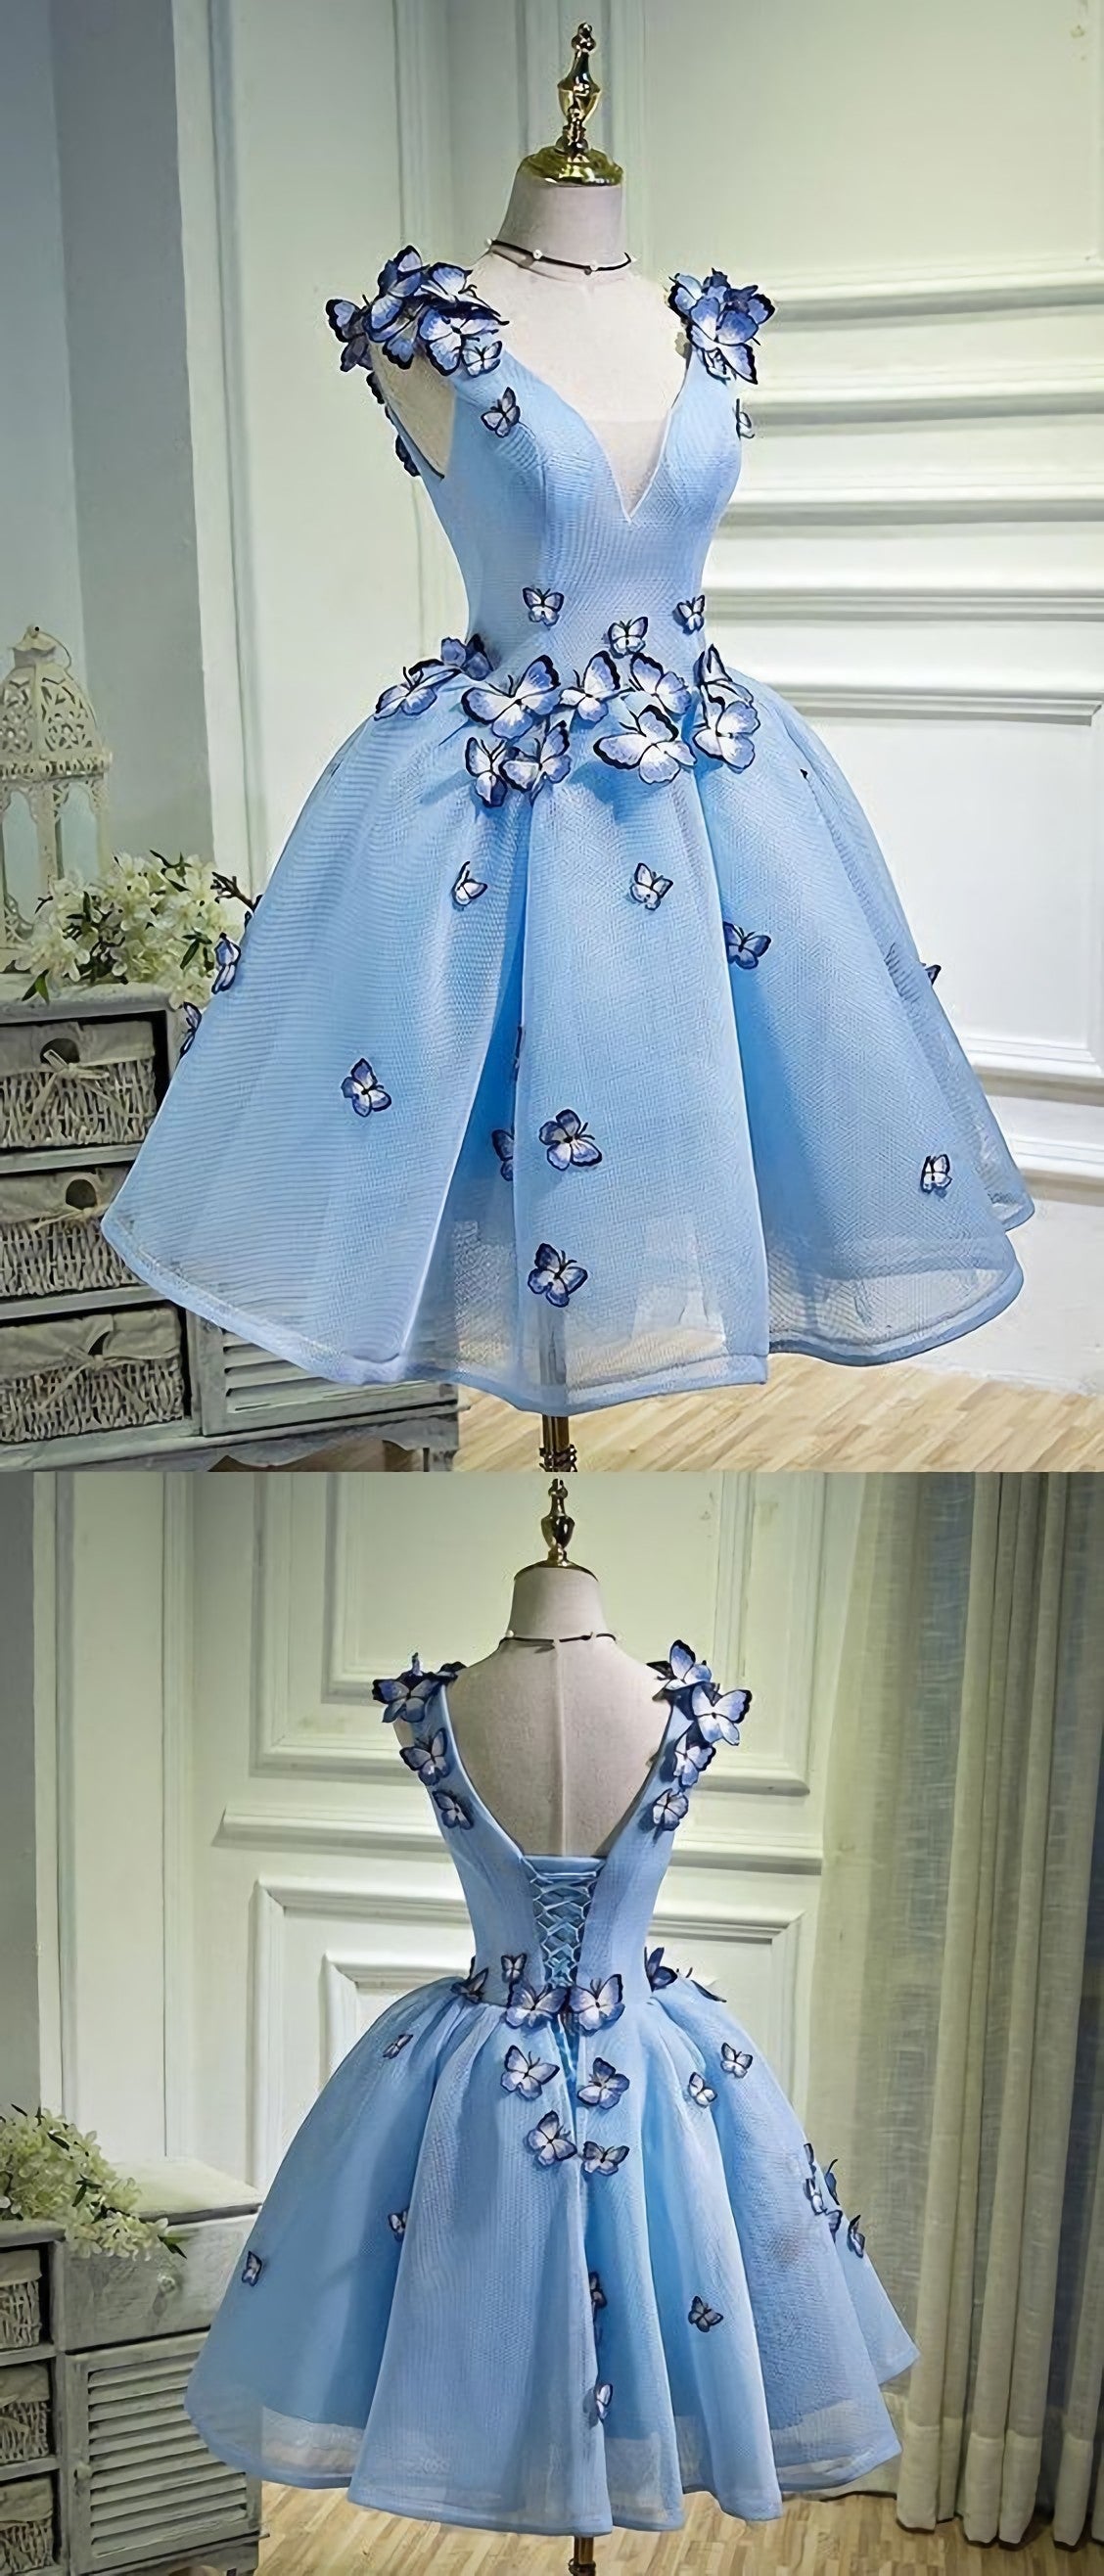 Prom Dresses Ideas, Sky Blue Butterfly Short Homecoming Dress, Party Dresses